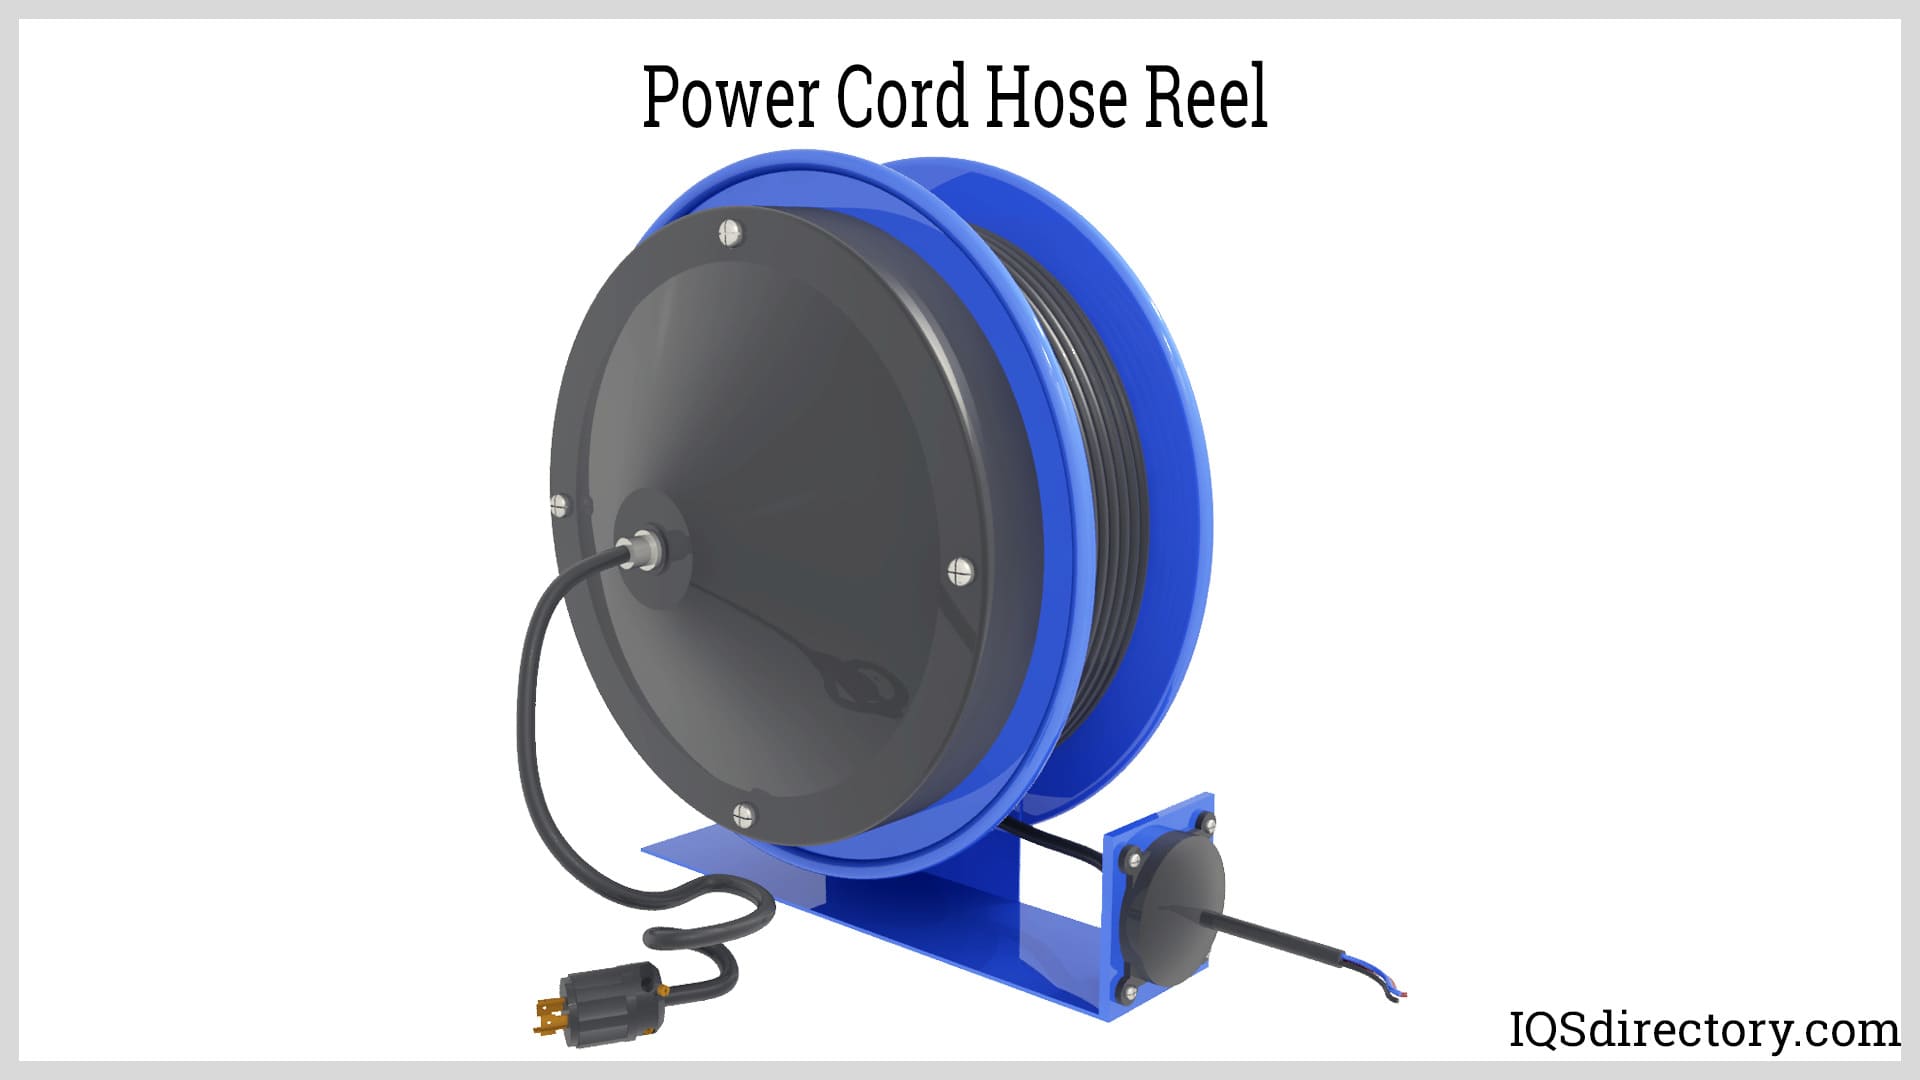 Hose Reel Supplier Provides Various Hose Reels to Suit Purposes